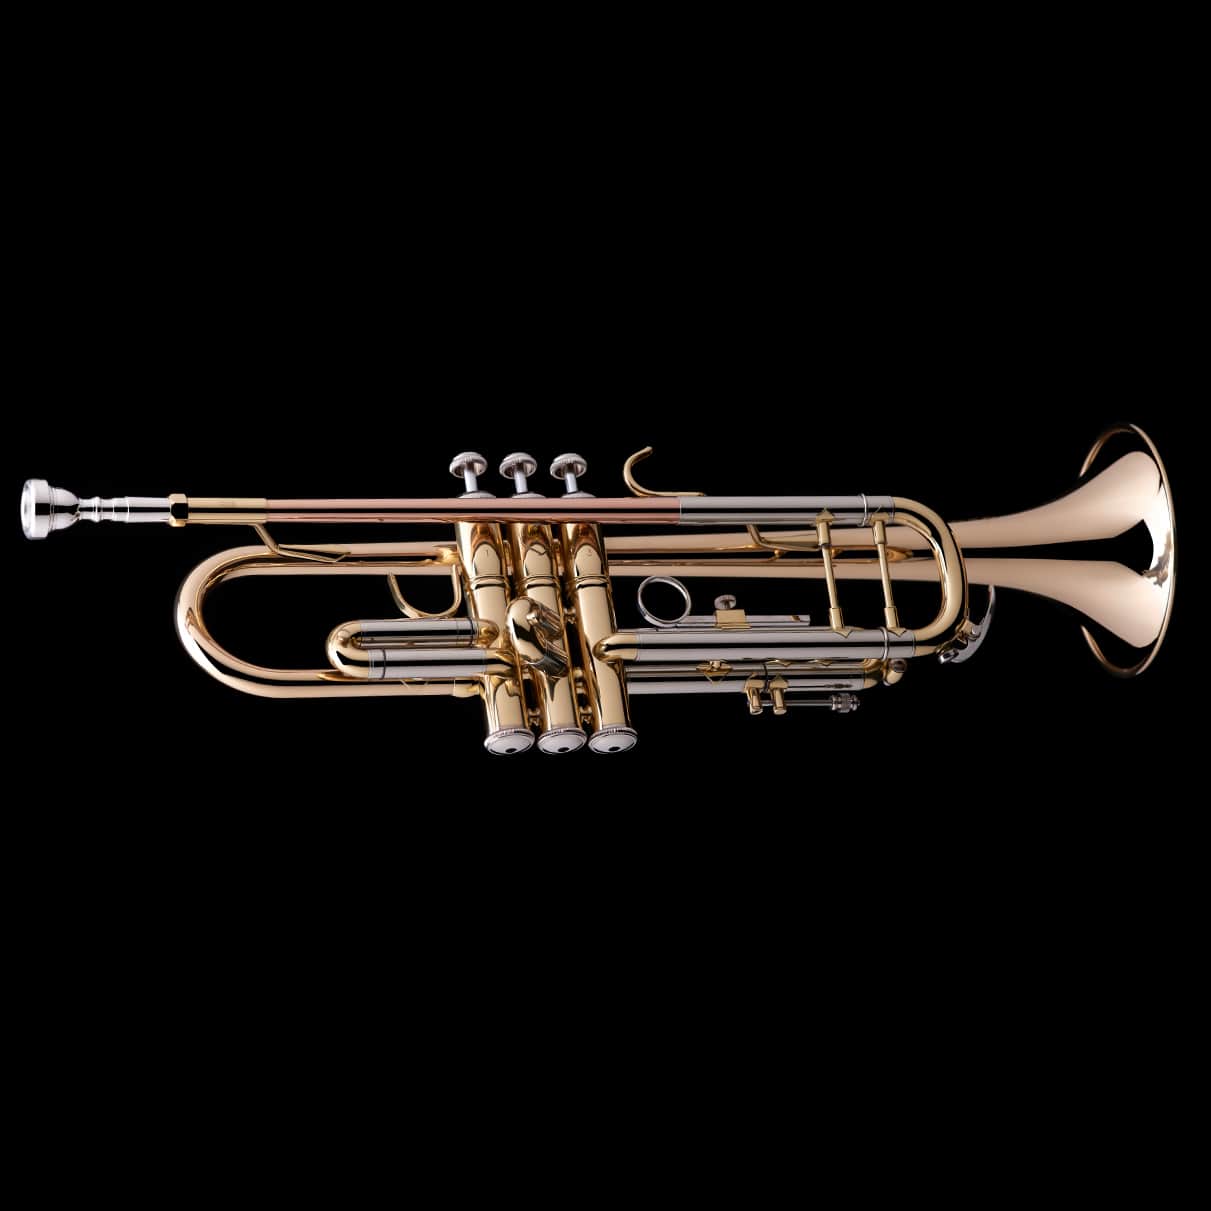 An image of a Bb Professional Trumpet from Wessex Tubas, facing right